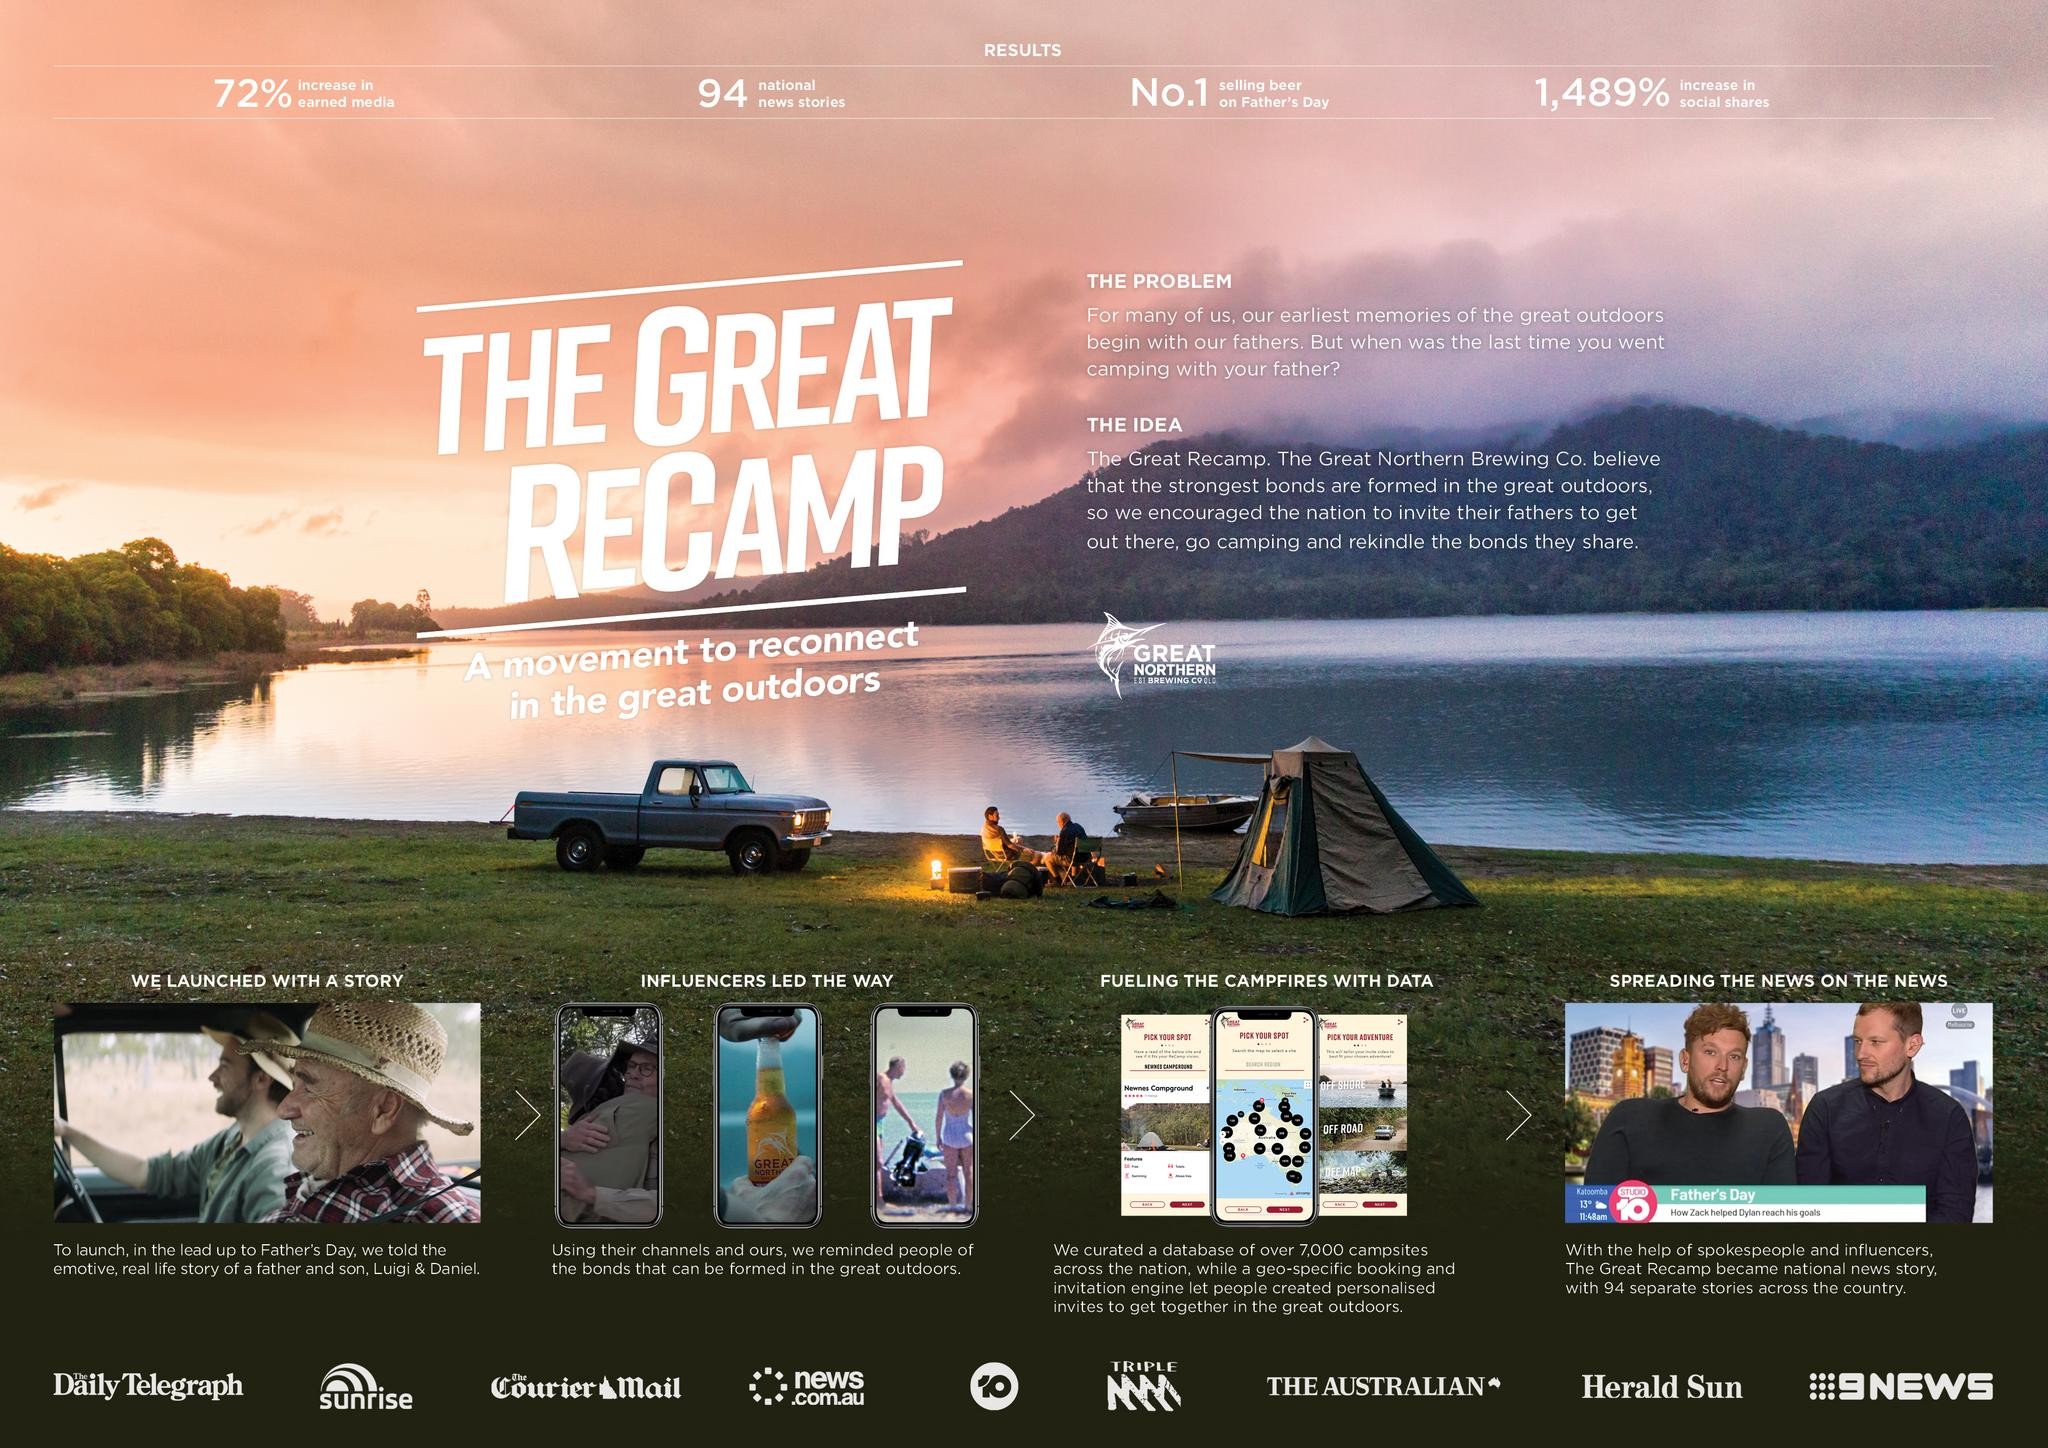 THE GREAT RECAMP